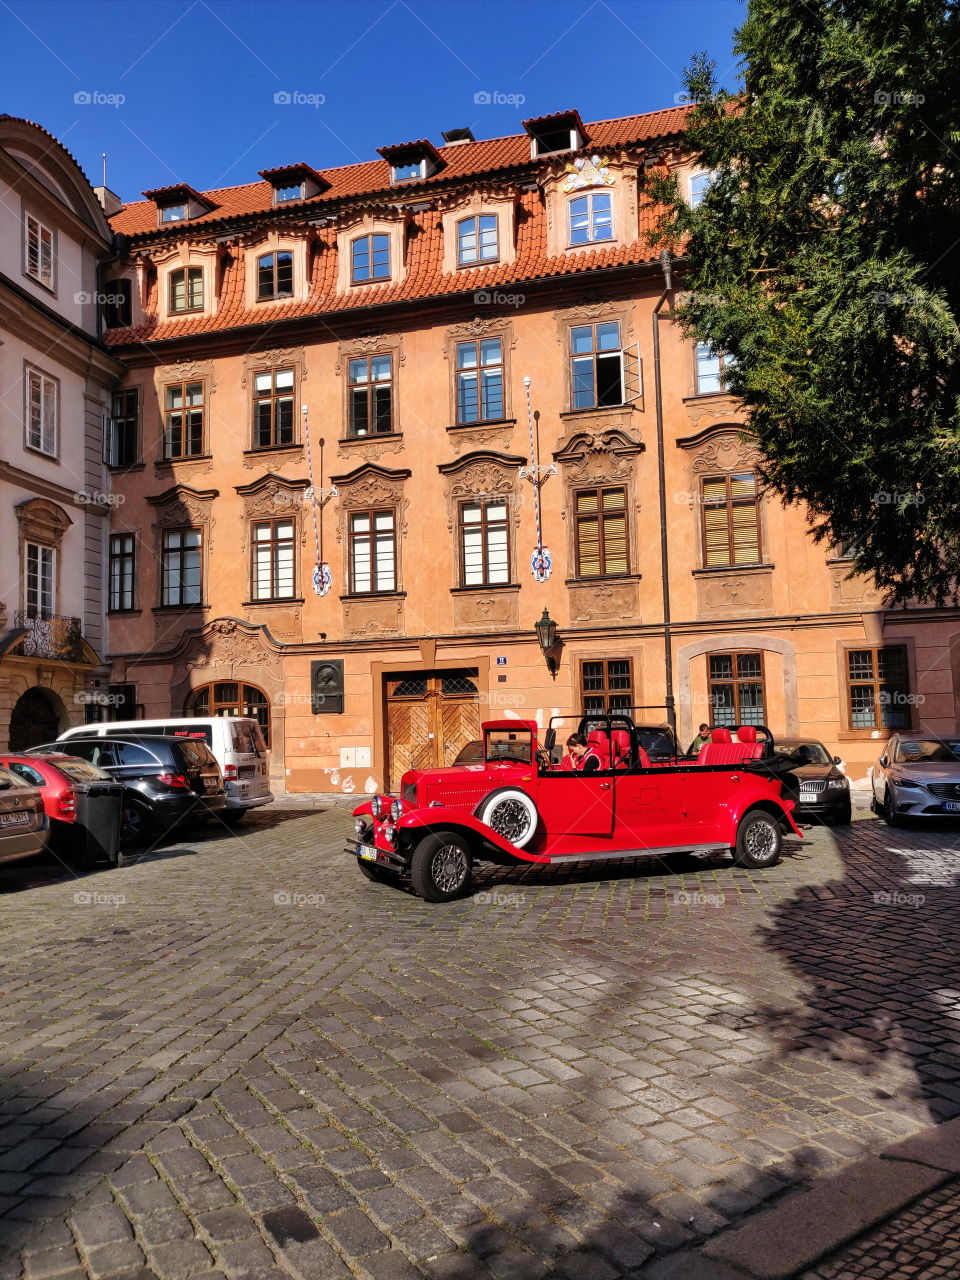 red limousine in the courtyard of the old city of prague